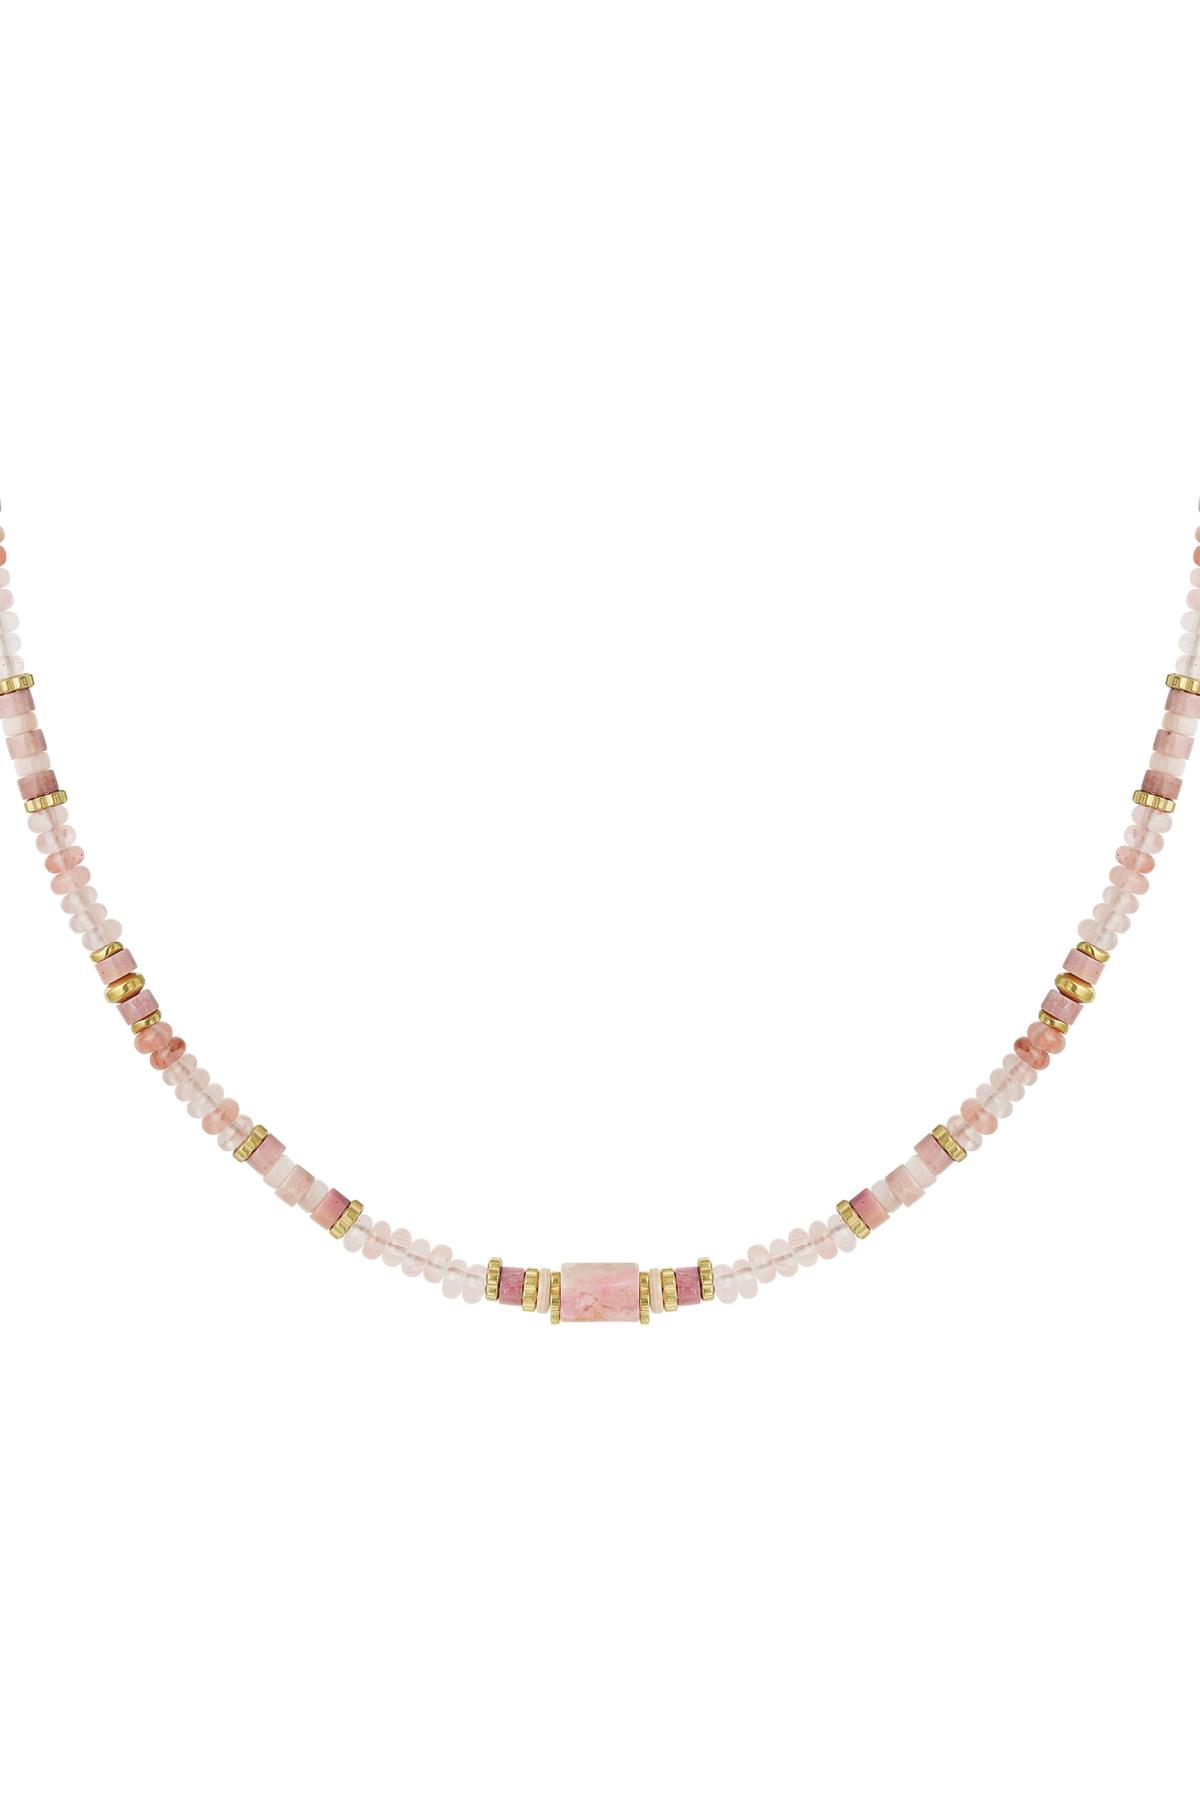 Collana perline party - Collezione Pietre Naturali Pink & Gold Stainless Steel 